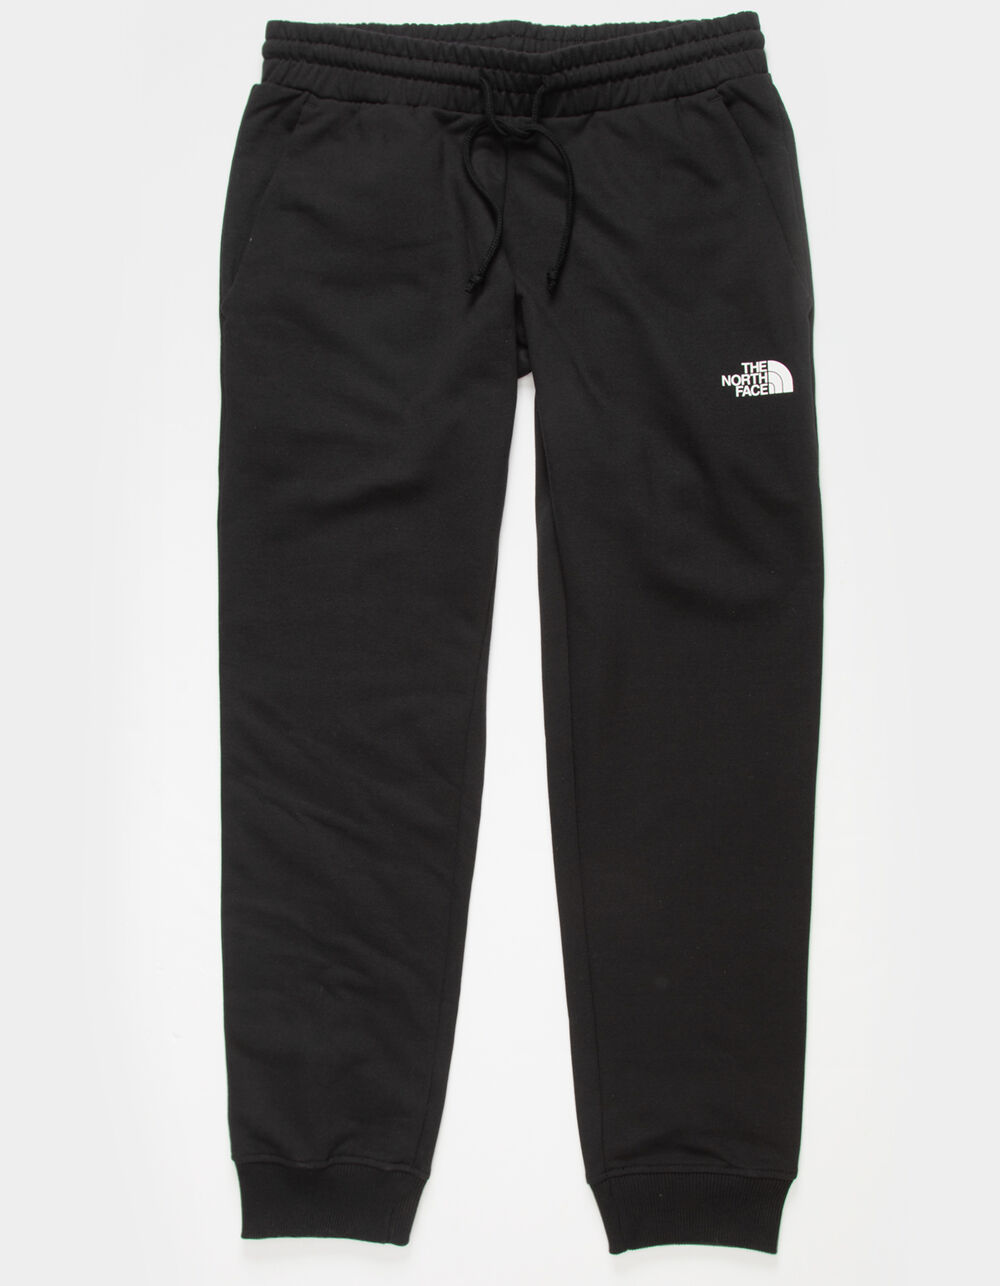 THE NORTH FACE Expedition Mens Sweatpants - BLACK | Tillys